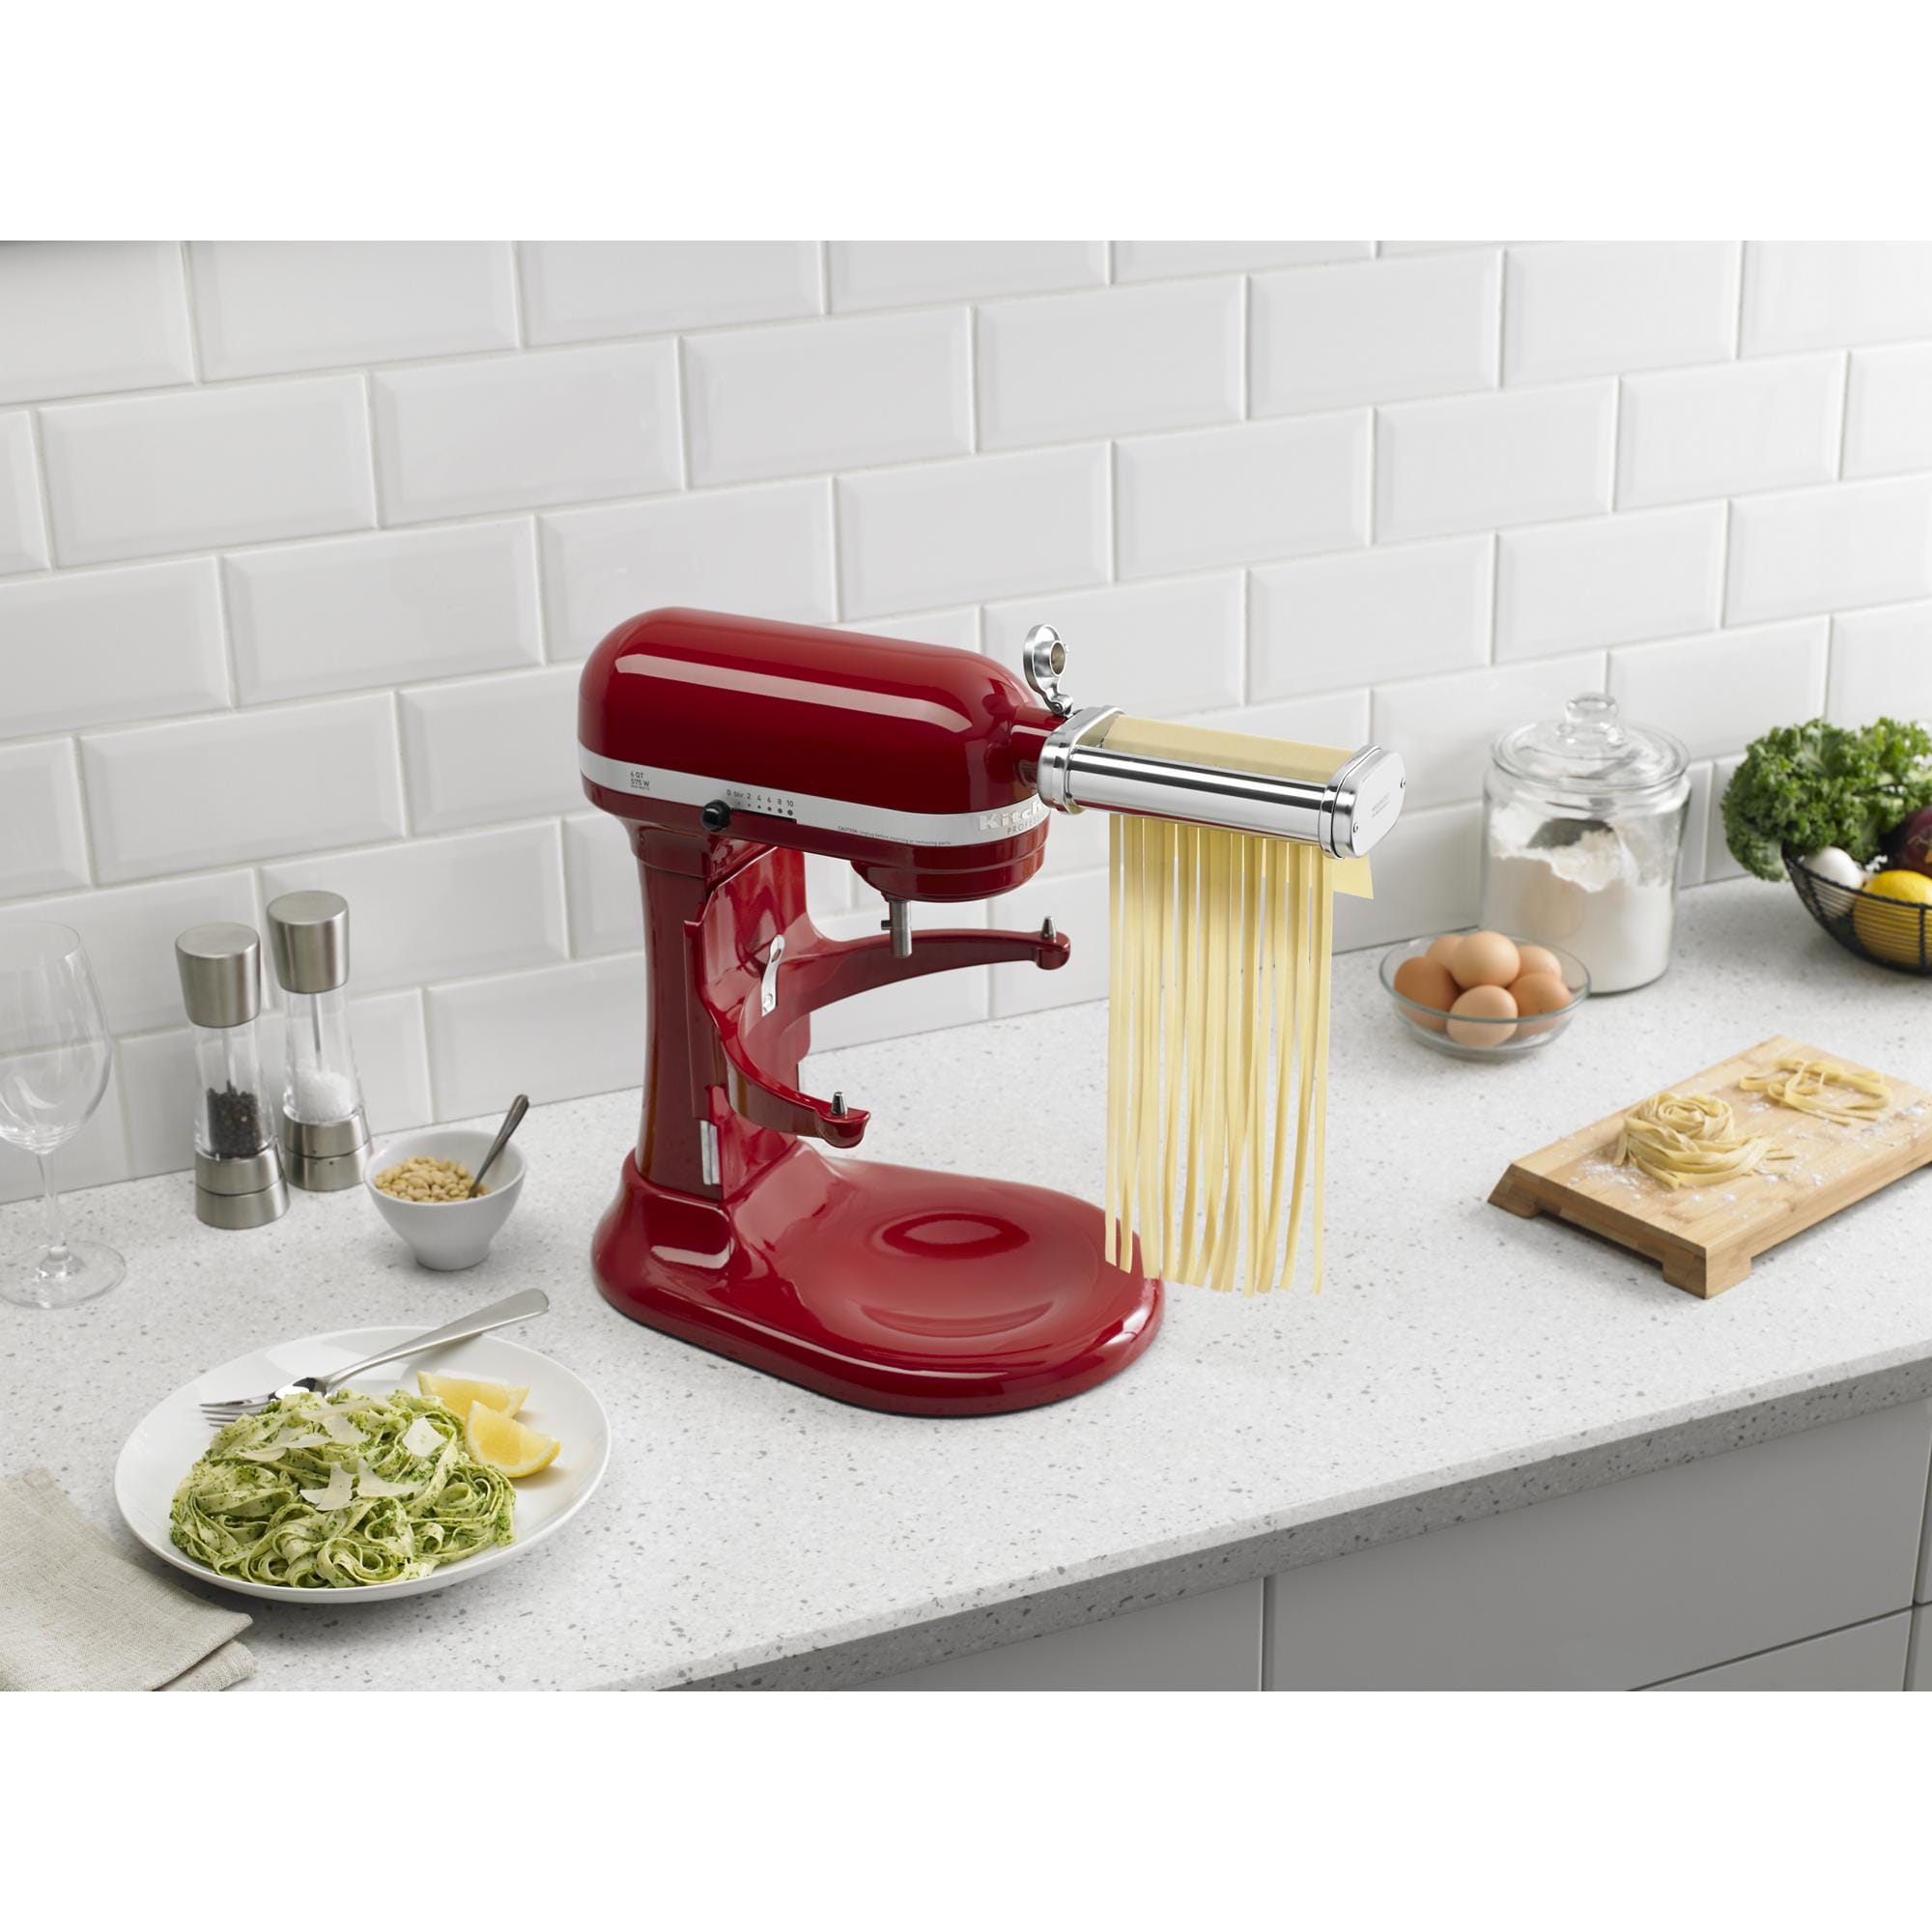  Pasta Roller & Cutters Attachment for KitchenAid Stand Mixers,  3 in 1 Pasta Maker Set Included Pasta Sheet Roller, Spaghetti Cutter,  Fettuccine Cutter Maker Accessories and Cleaning Brush : Home & Kitchen